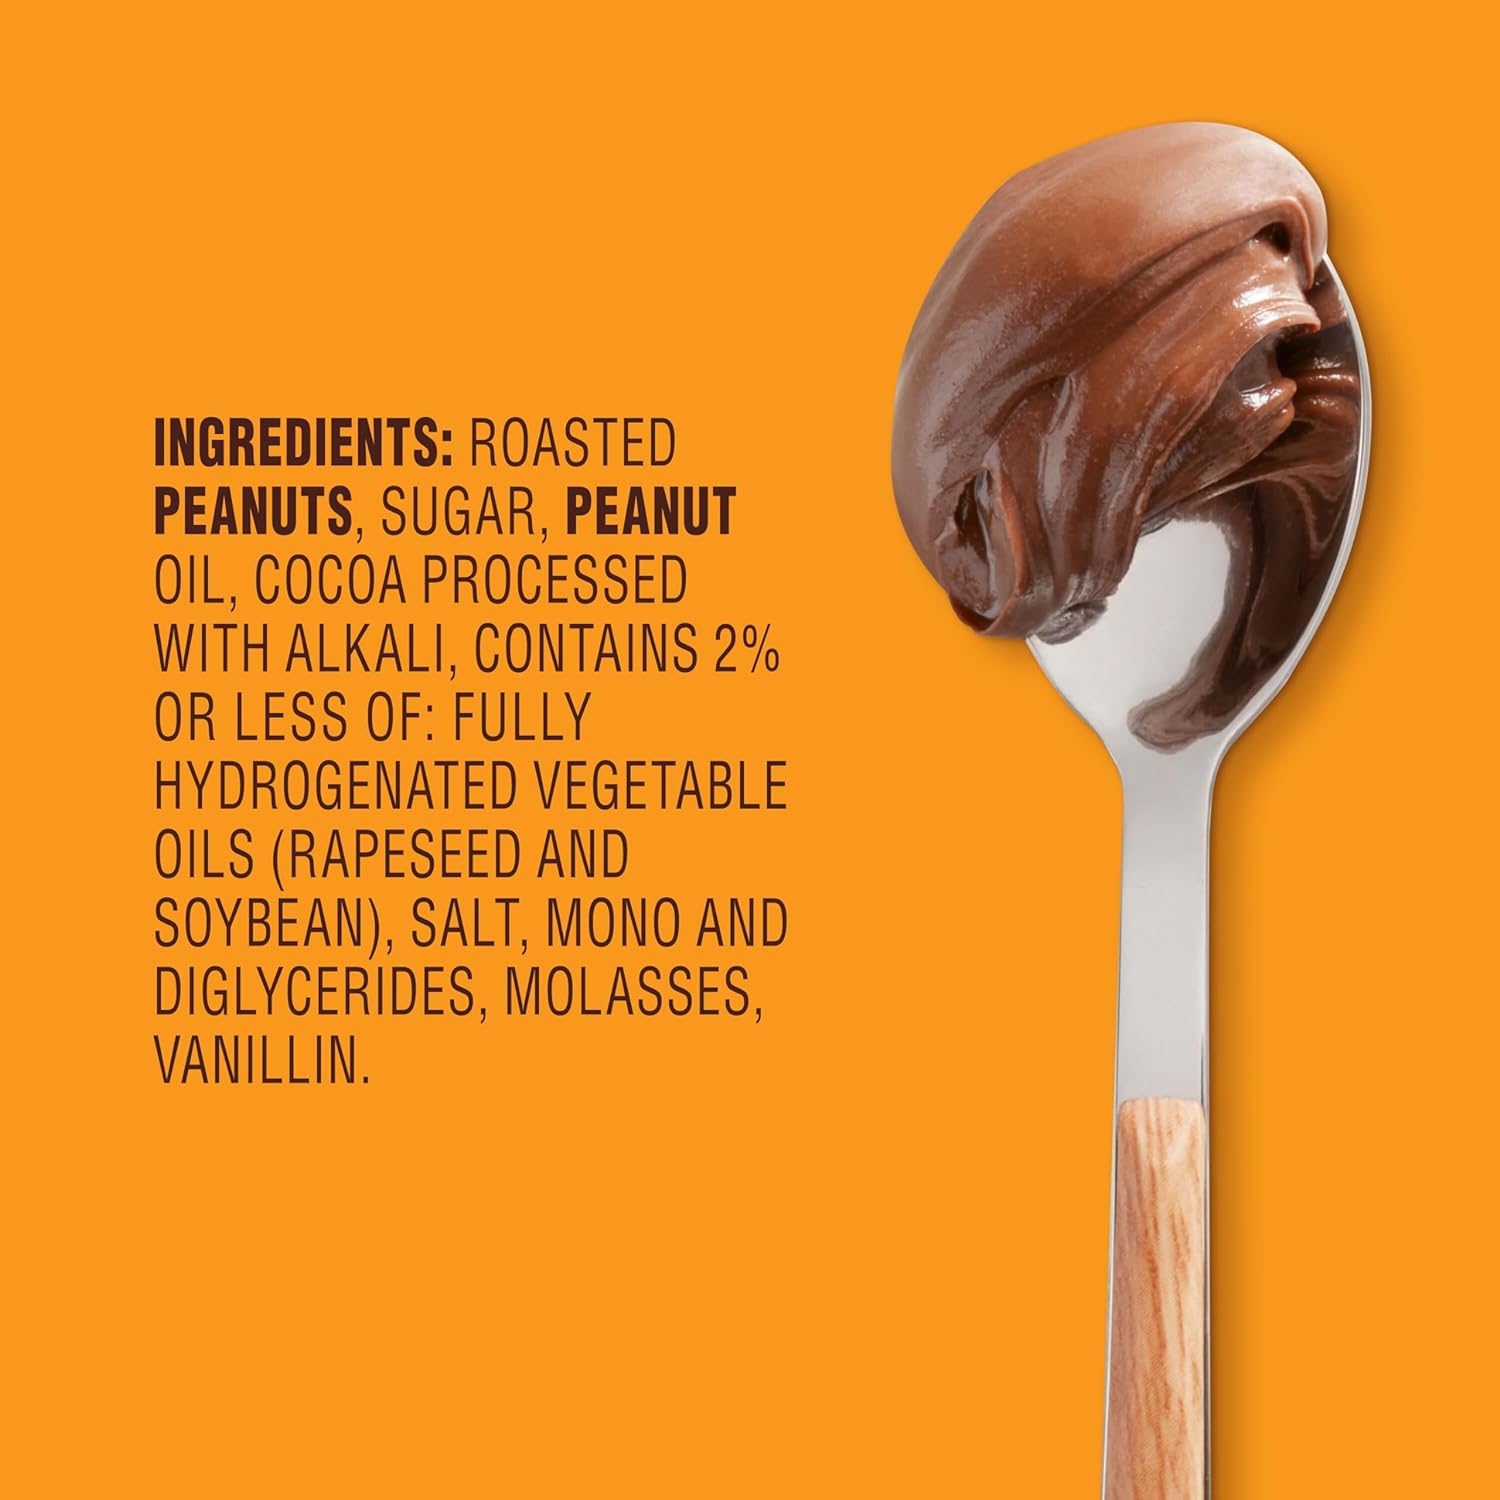 Jif Peanut Butter and Chocolate Flavored Spread ingredients